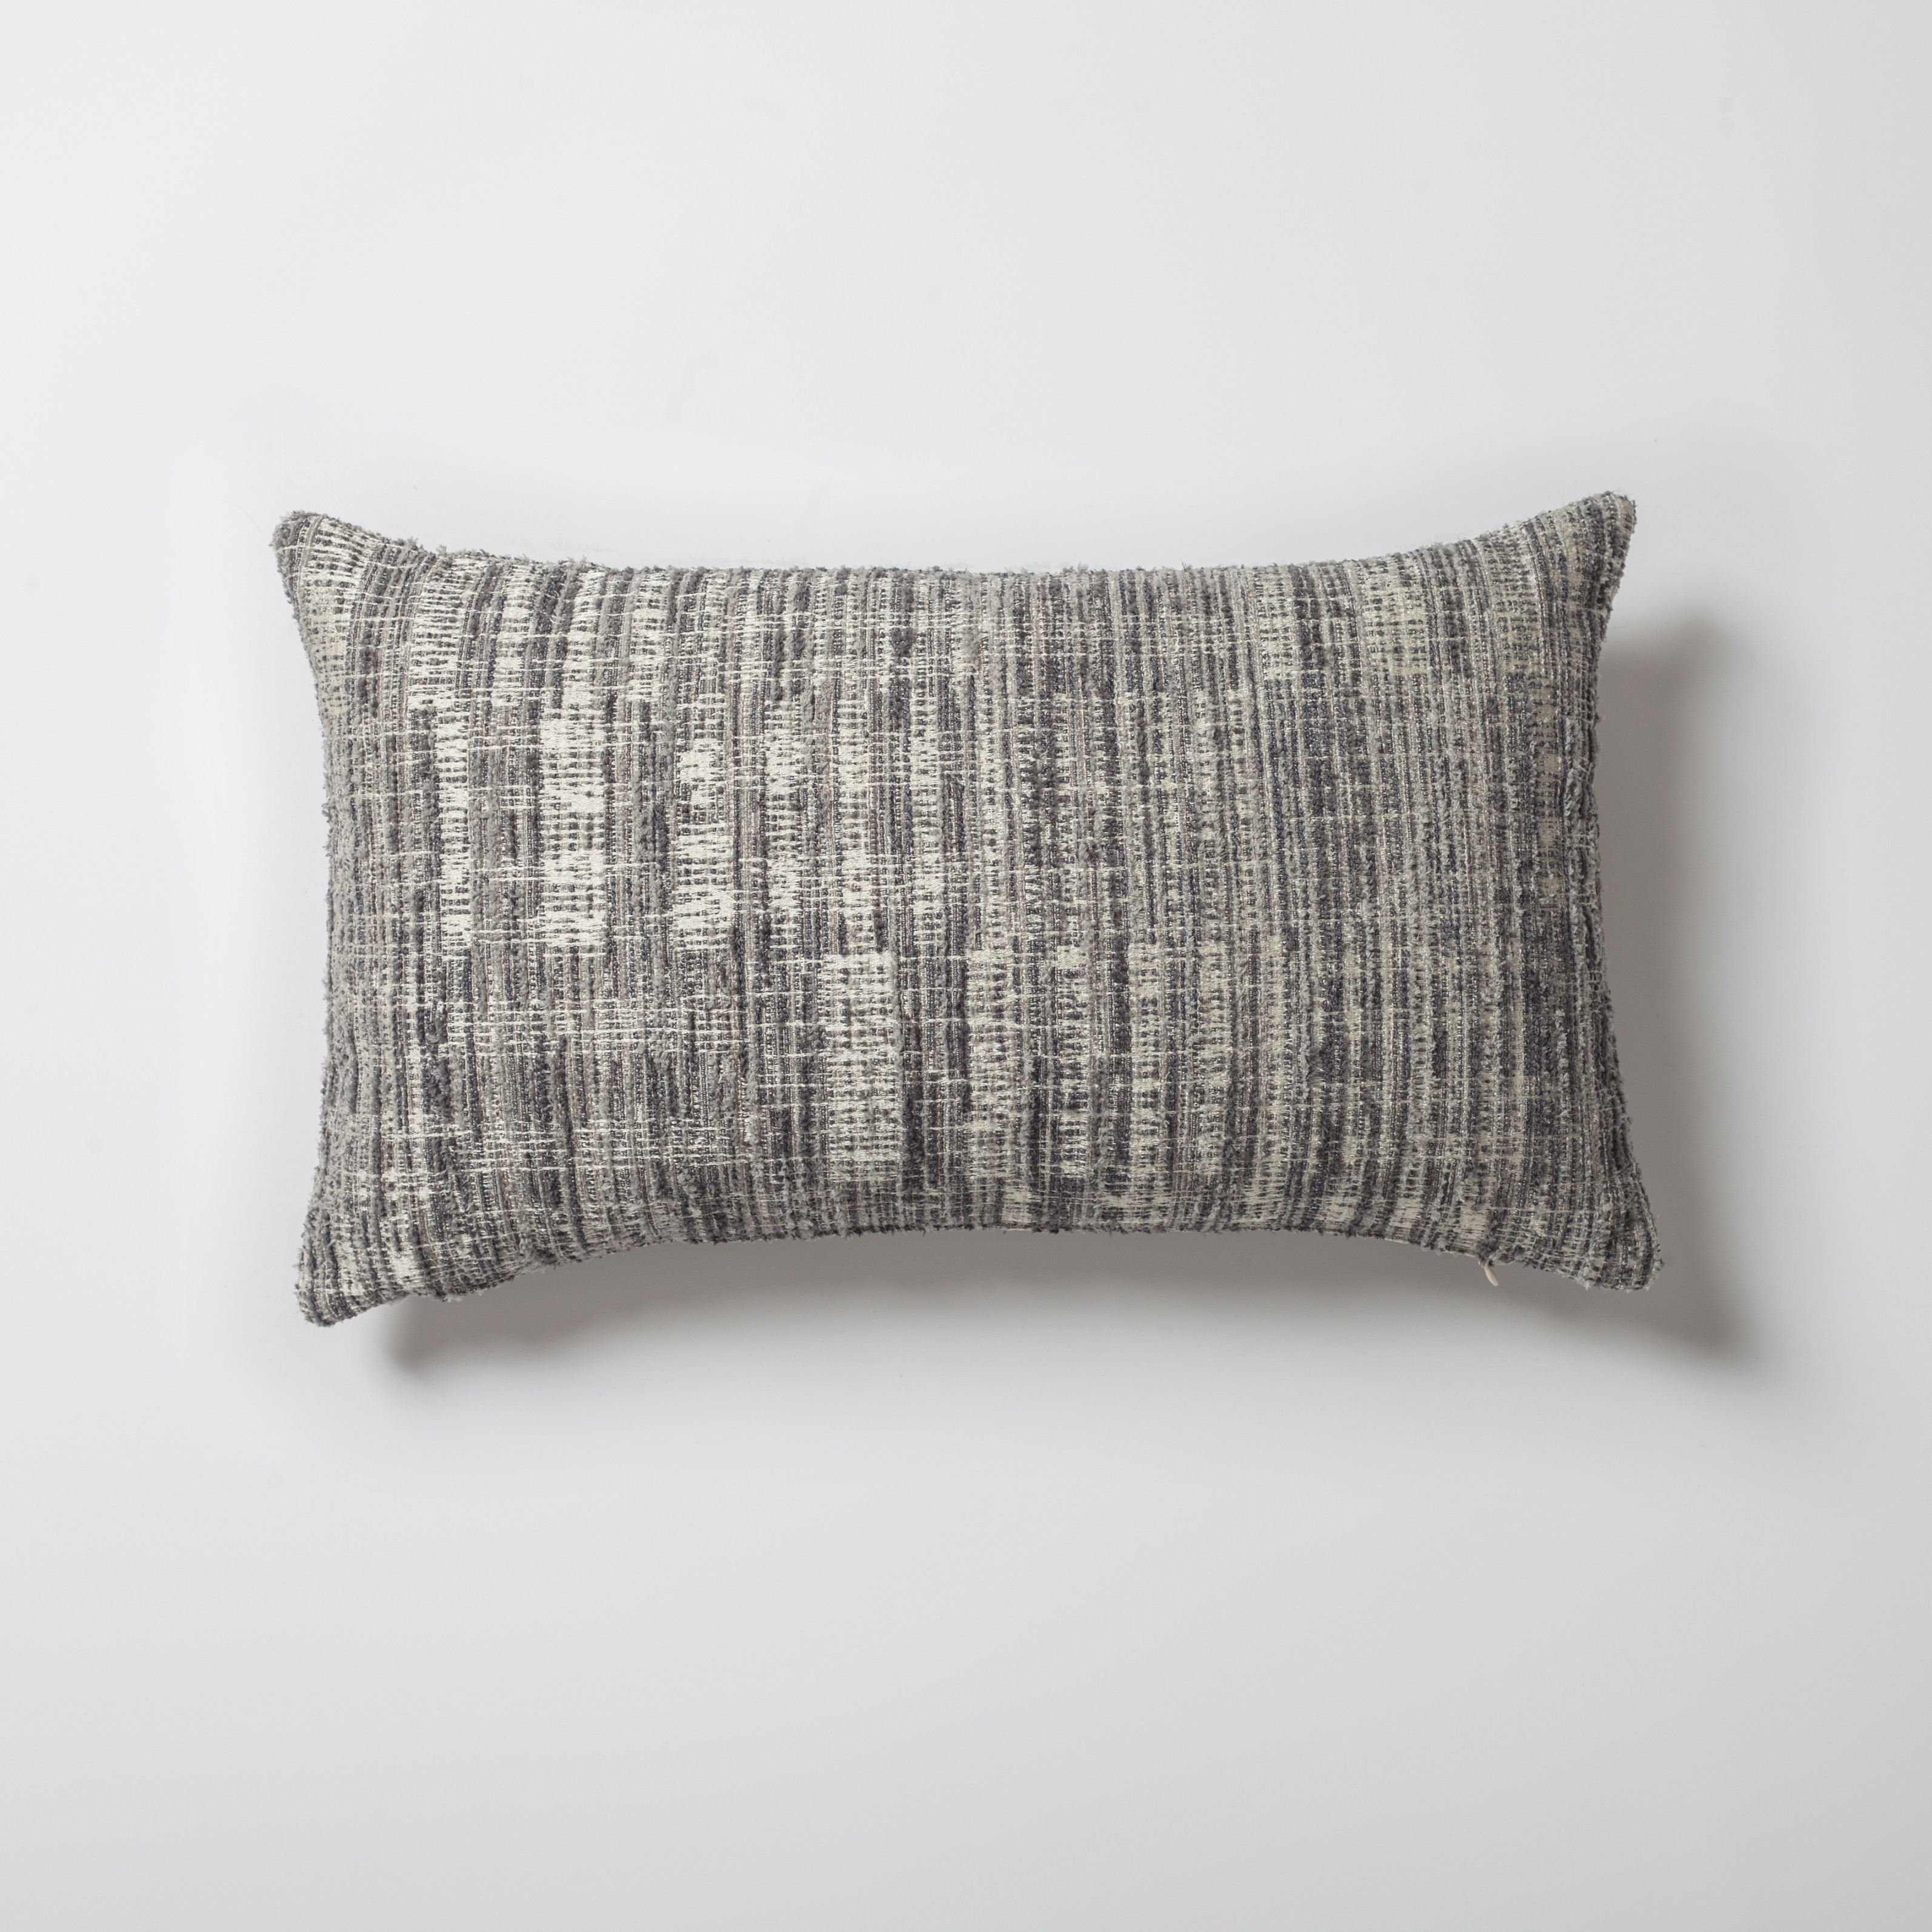 "Tweed" - Abstract Textured Rectangle Pillow 12x20 Inch - Grey (Cover Only)